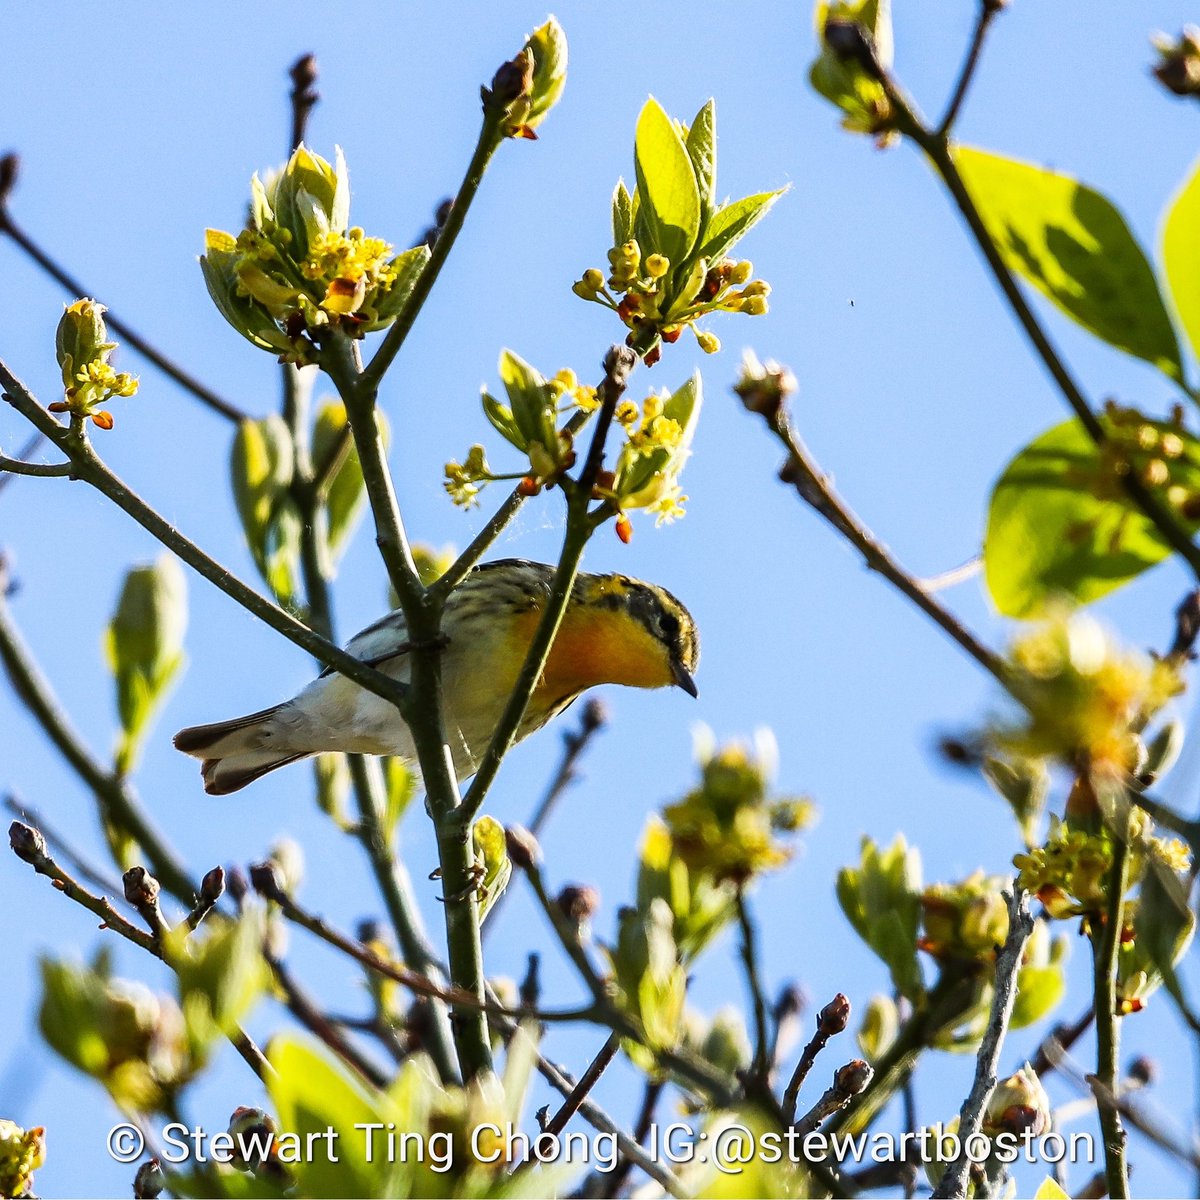 #BlackburnianWarbler
The breeding male, with vivid orange in face and throat, is unmistakable; females and immatures show a hint of this coloration, but more important is the unique triangular facial pattern of black (or gray). #BirdWatching #BirdPhotography #BirdPhotos #birding